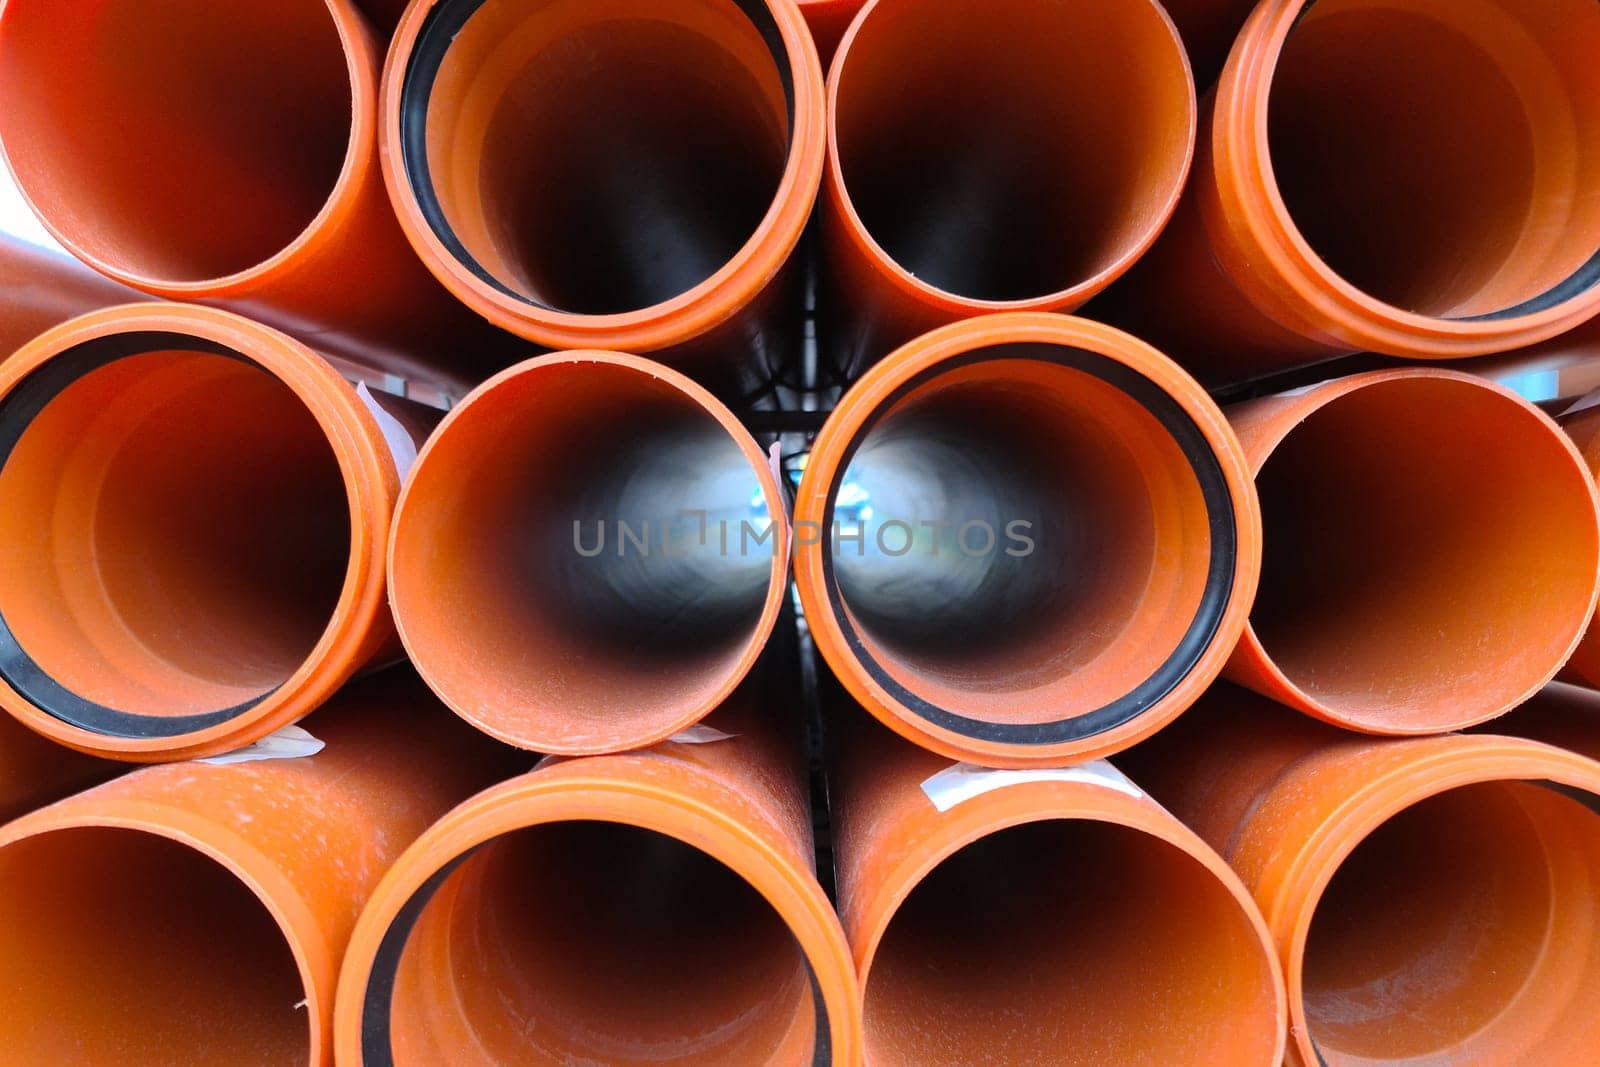 Lots of new orange sewer pipes with gaskets, 100mm by Rom4ek